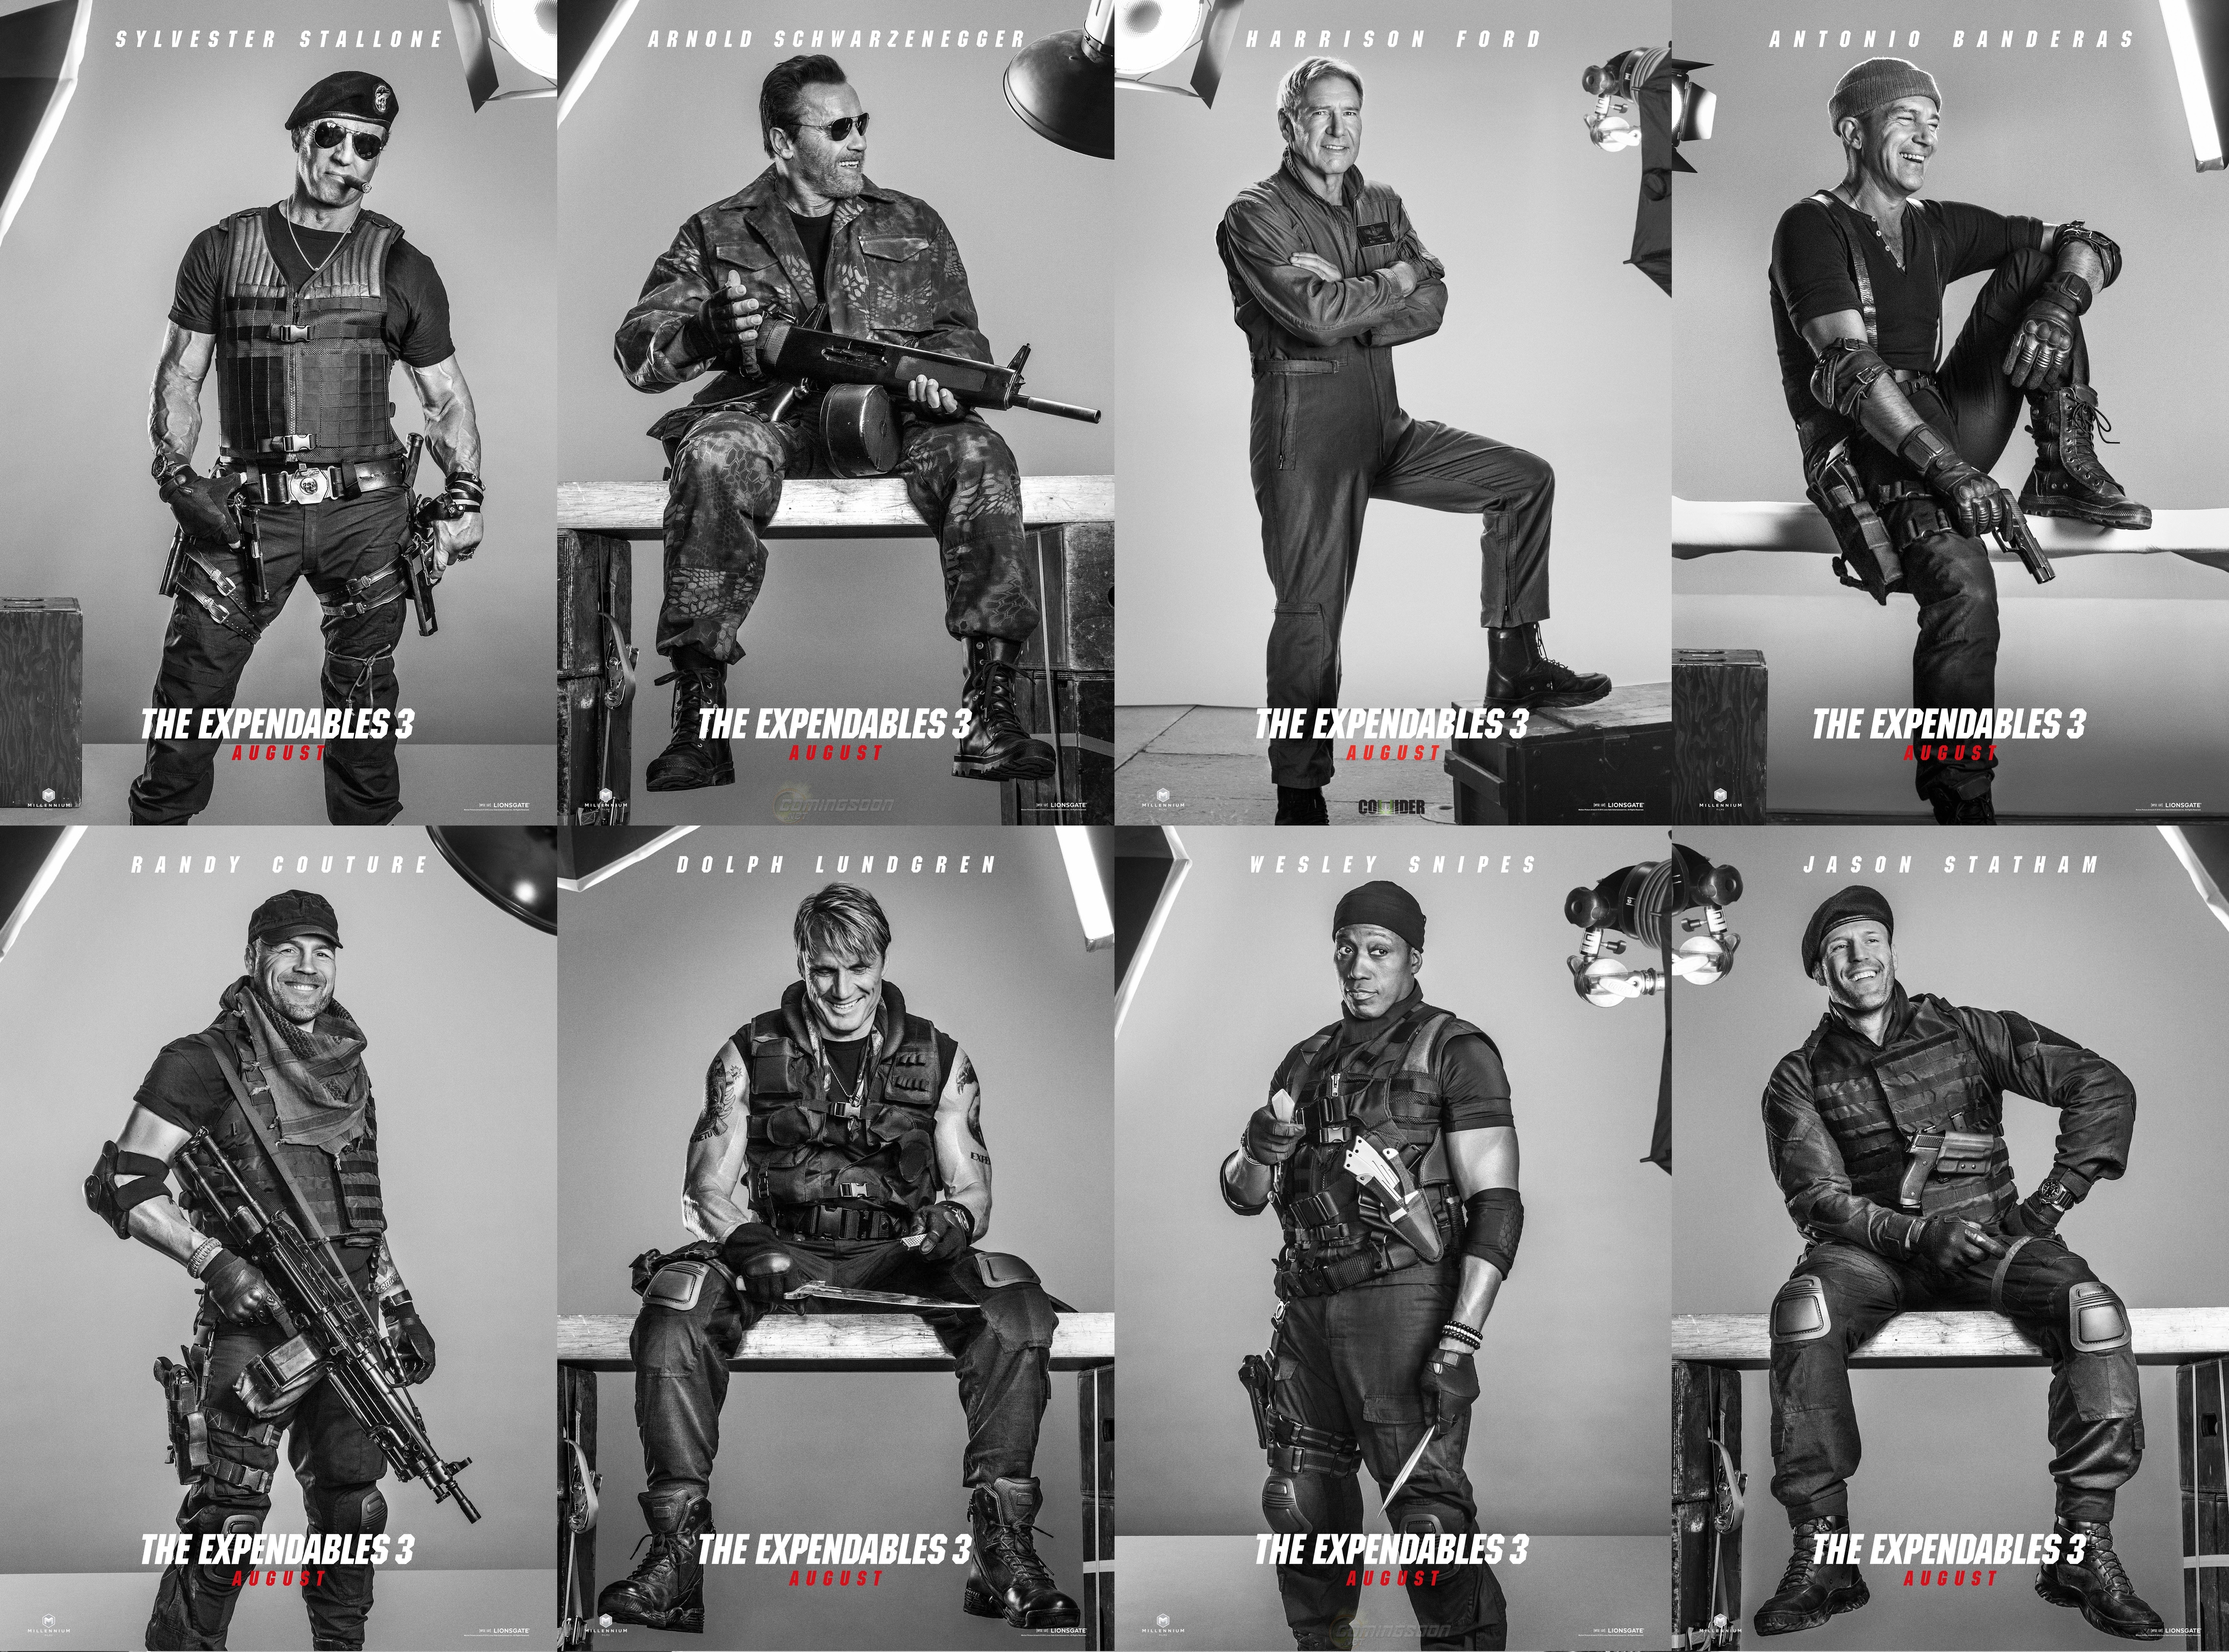 harrison ford, wesley snipes, movie, the expendables 3, antonio banderas, arnold schwarzenegger, barney ross, doc (the expendables), dolph lundgren, galgo (the expendables), gunnar jensen, jason statham, lee christmas, max drummer, randy couture, sylvester stallone, toll road, trench (the expendables), the expendables HD wallpaper